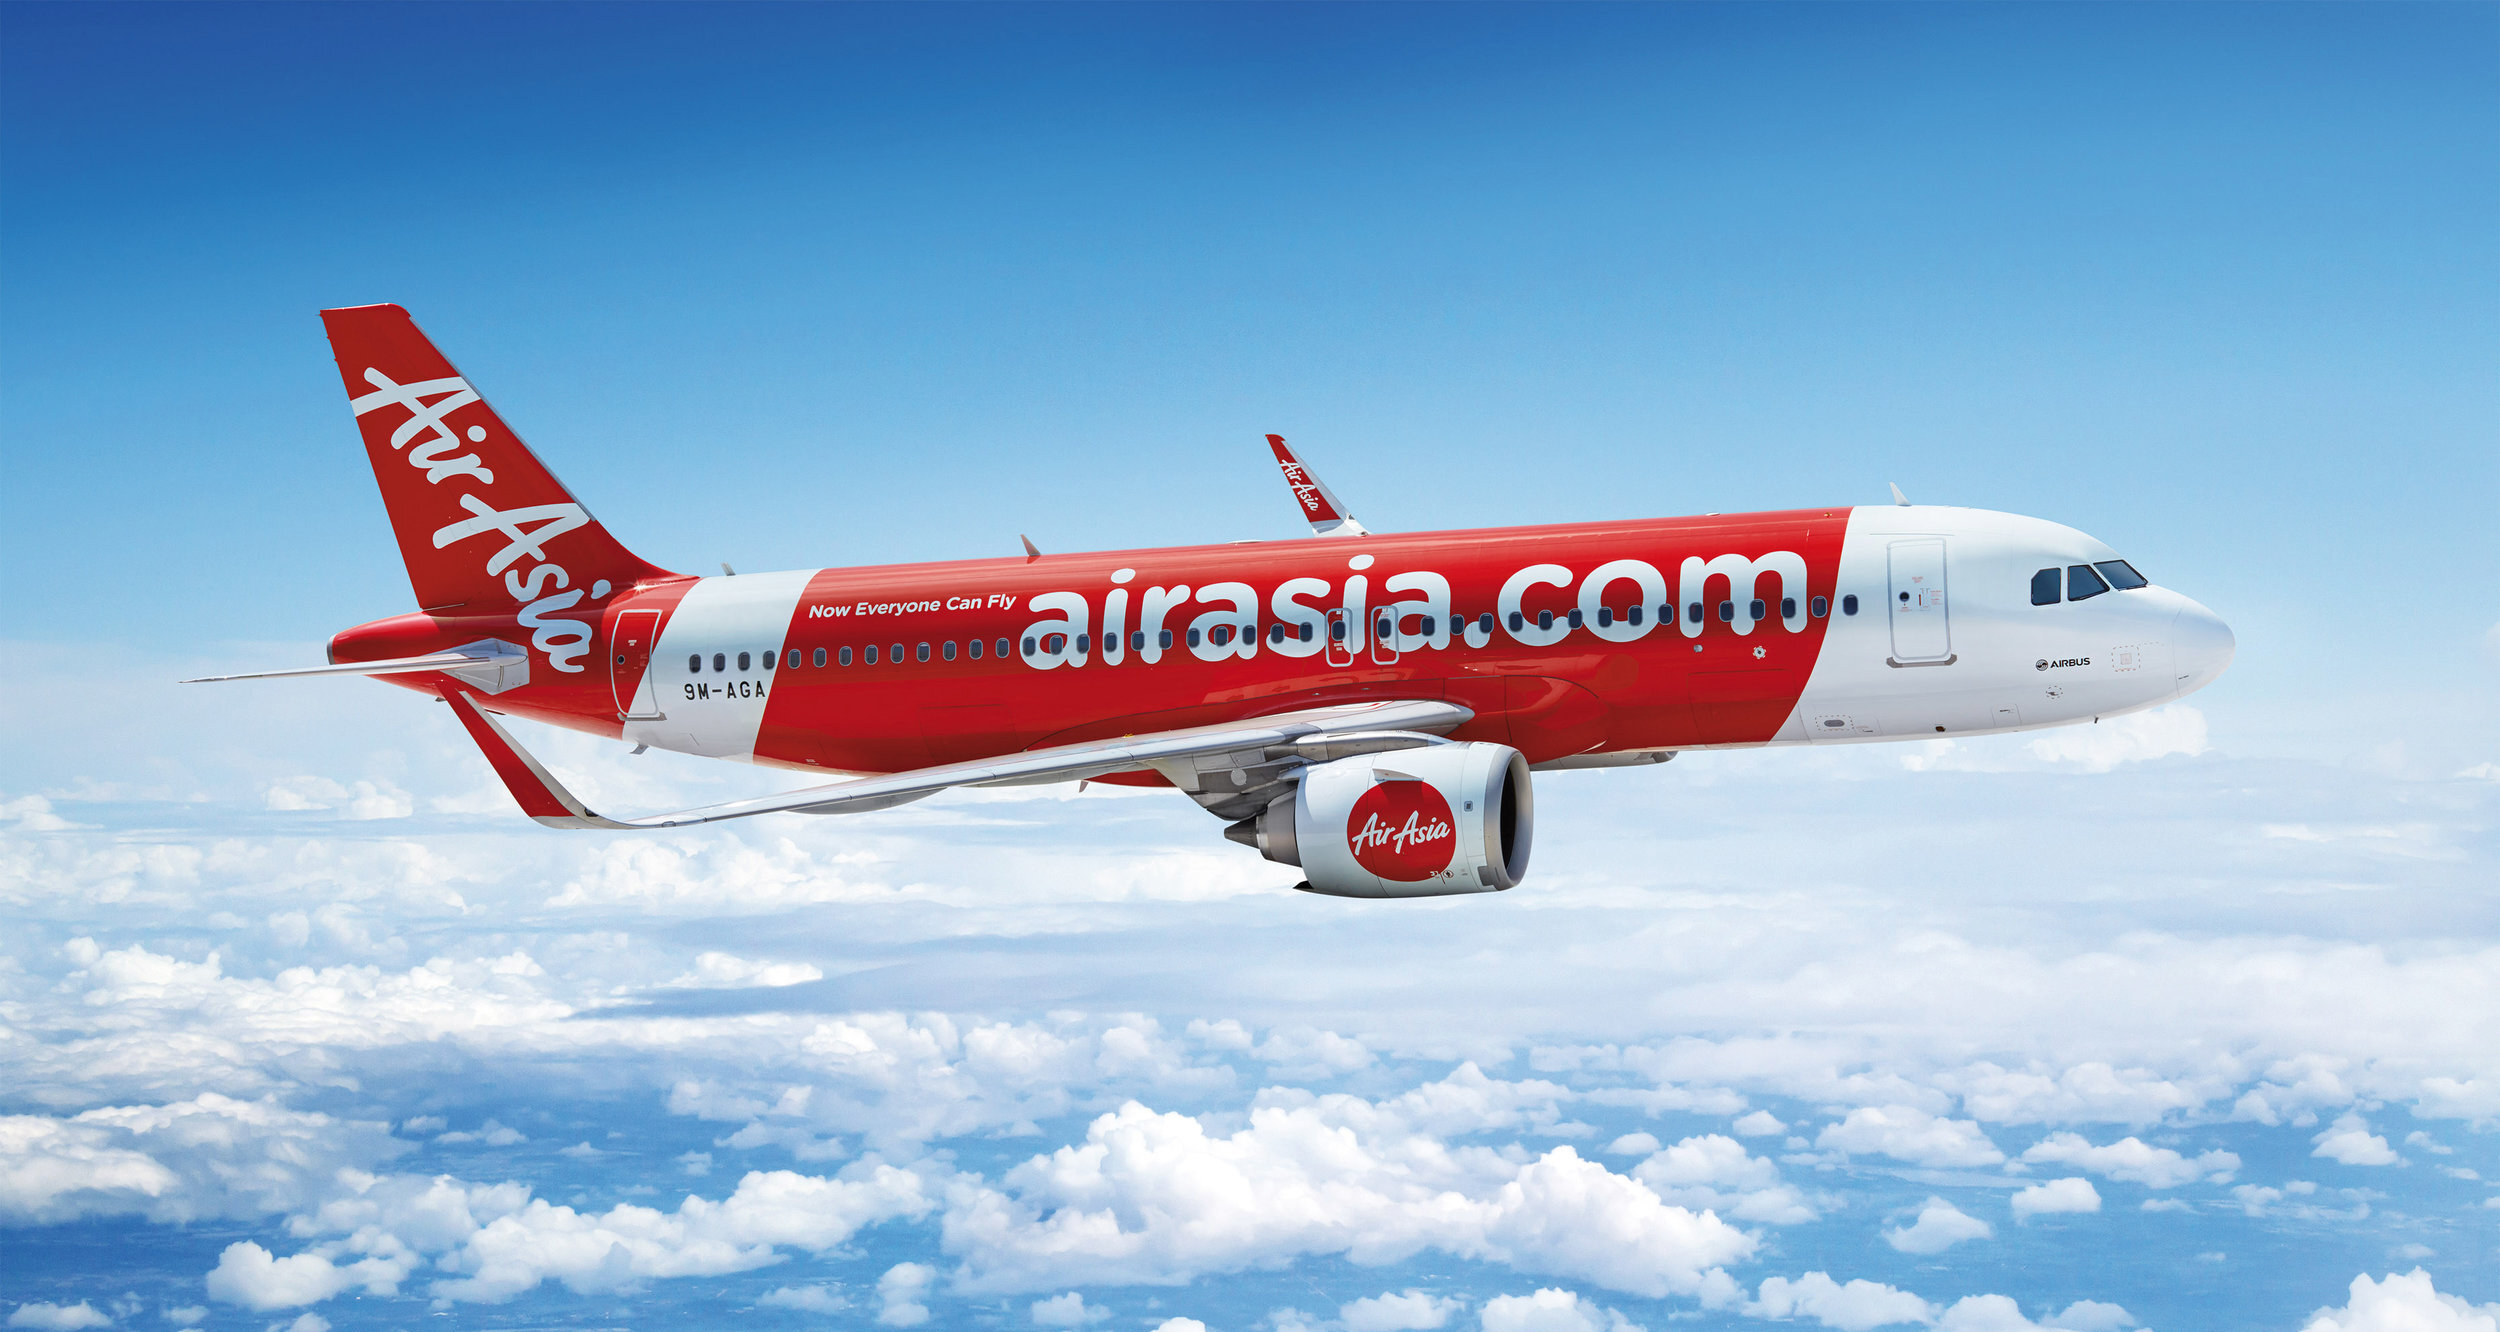 18-facts-about-airasia